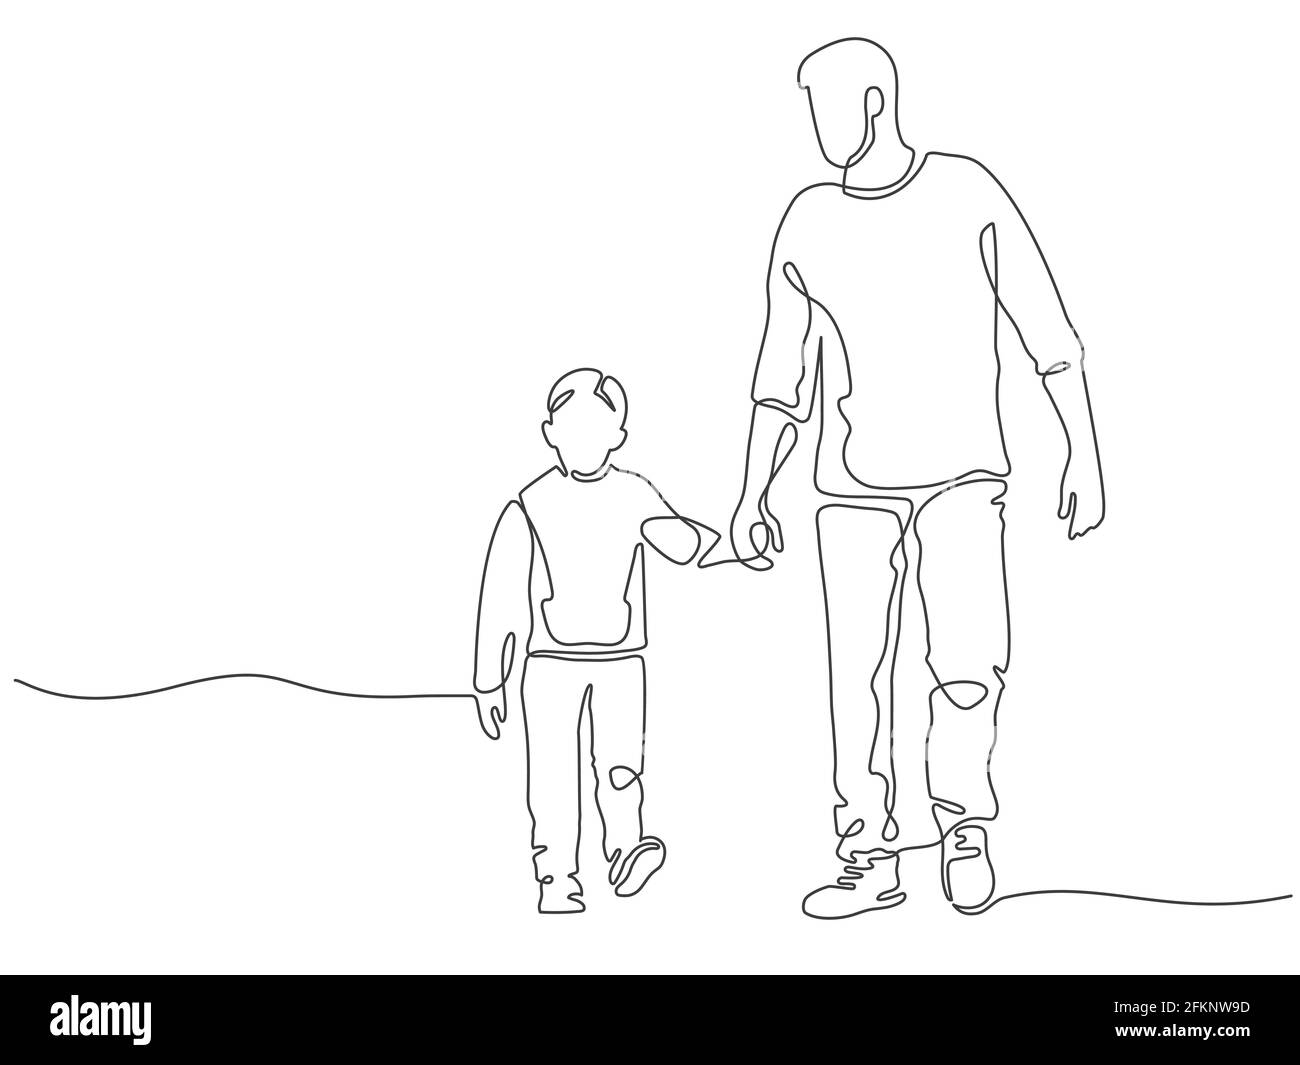 One line father. Dad walking with son. Fatherhood poster with man and child holding hands. Continuous lines happy fathers day vector concept Stock Vector